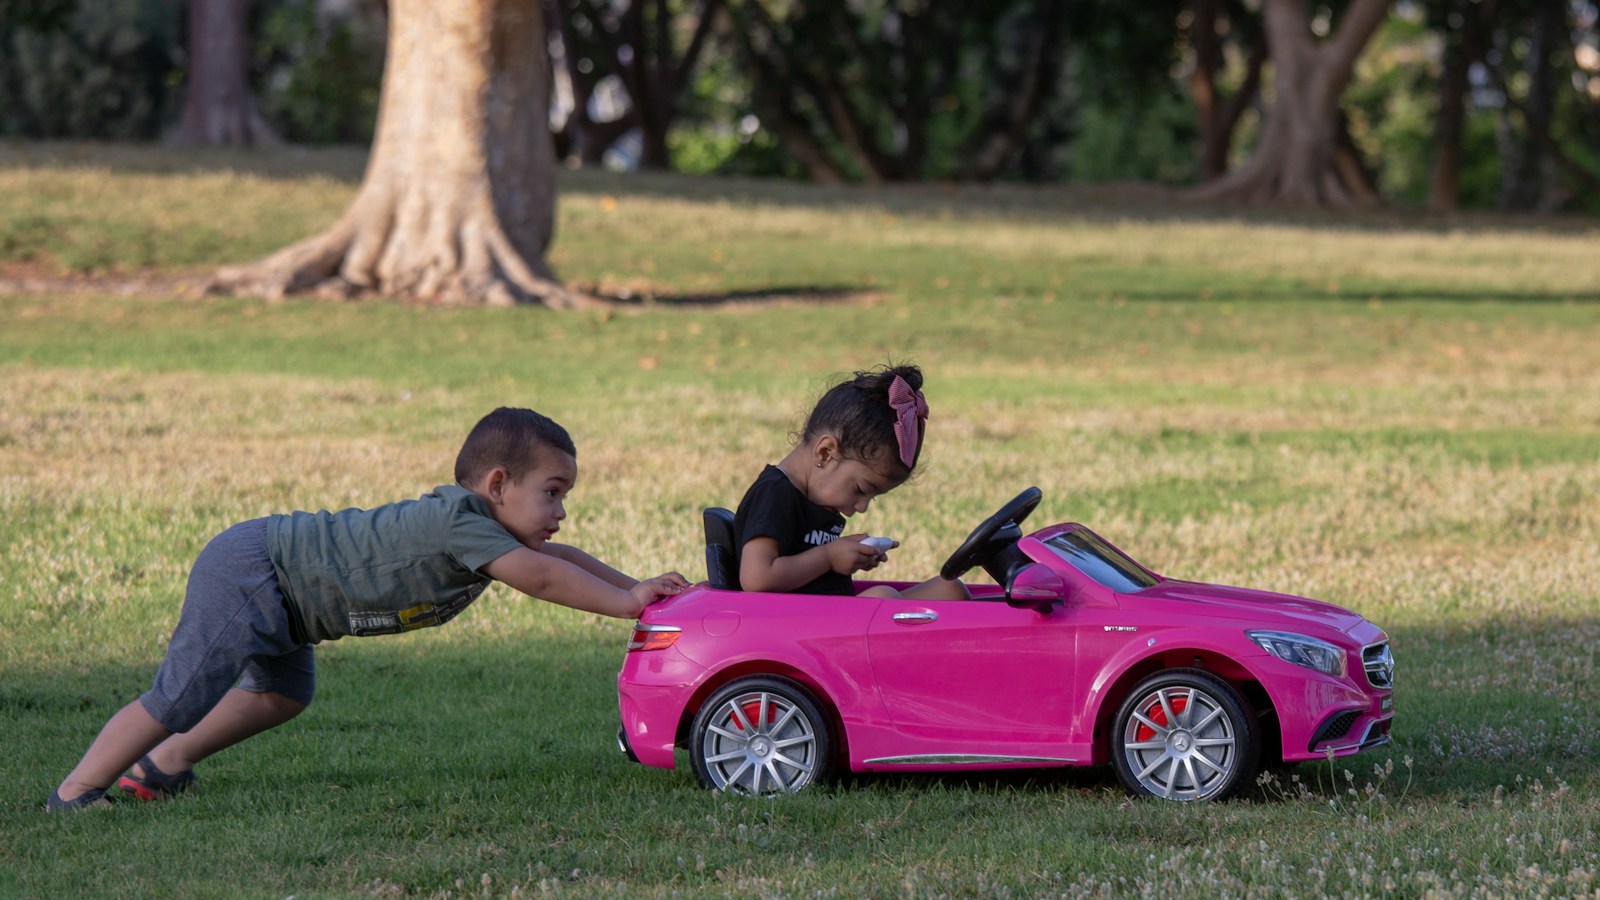 two children playing with a pink toy car